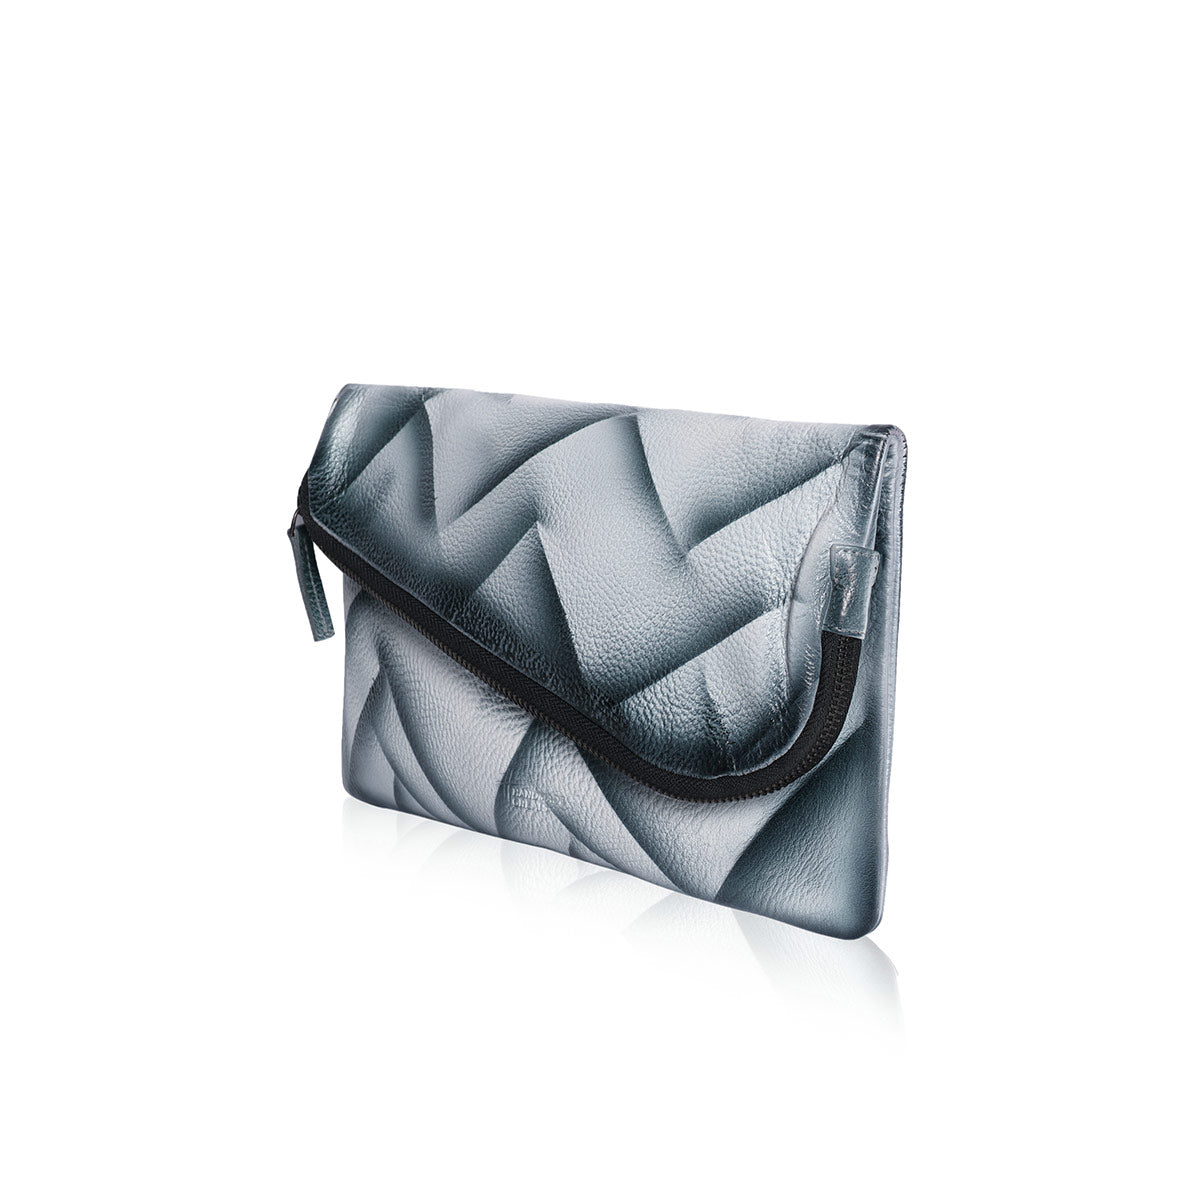 Mount3d- Leather Clutch